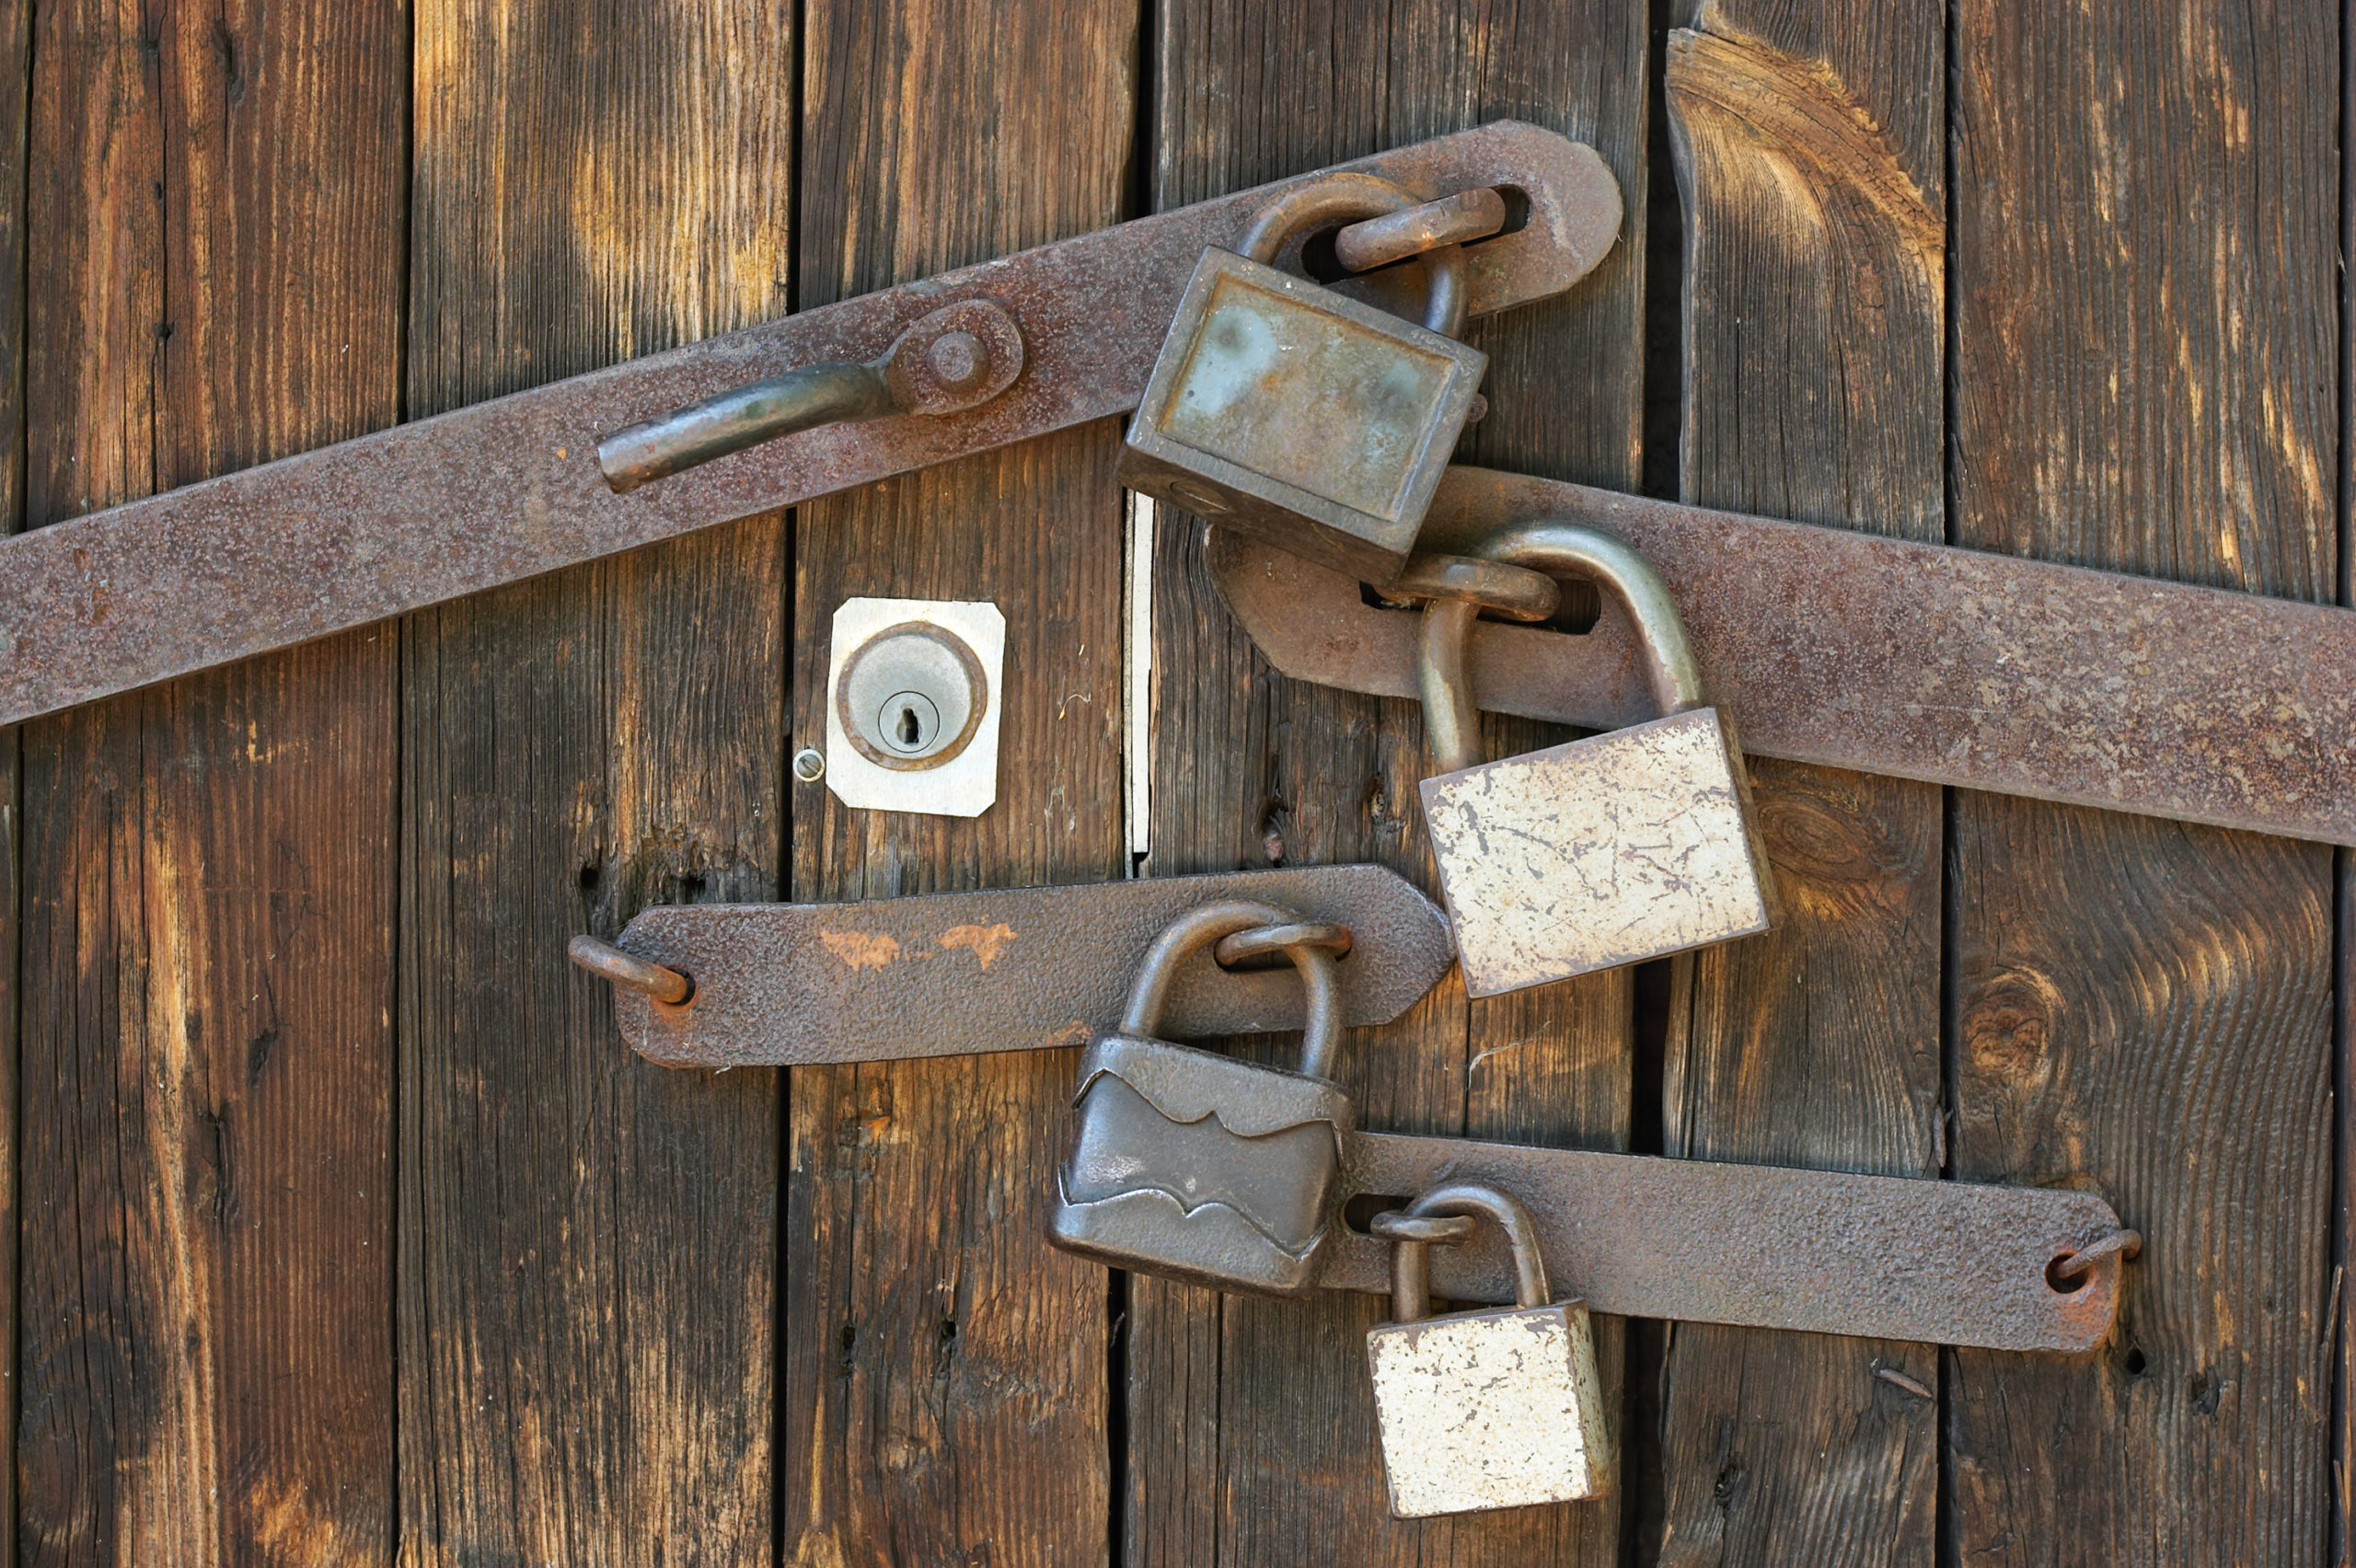 Several padlocks and rusted locks on a solid wooden door